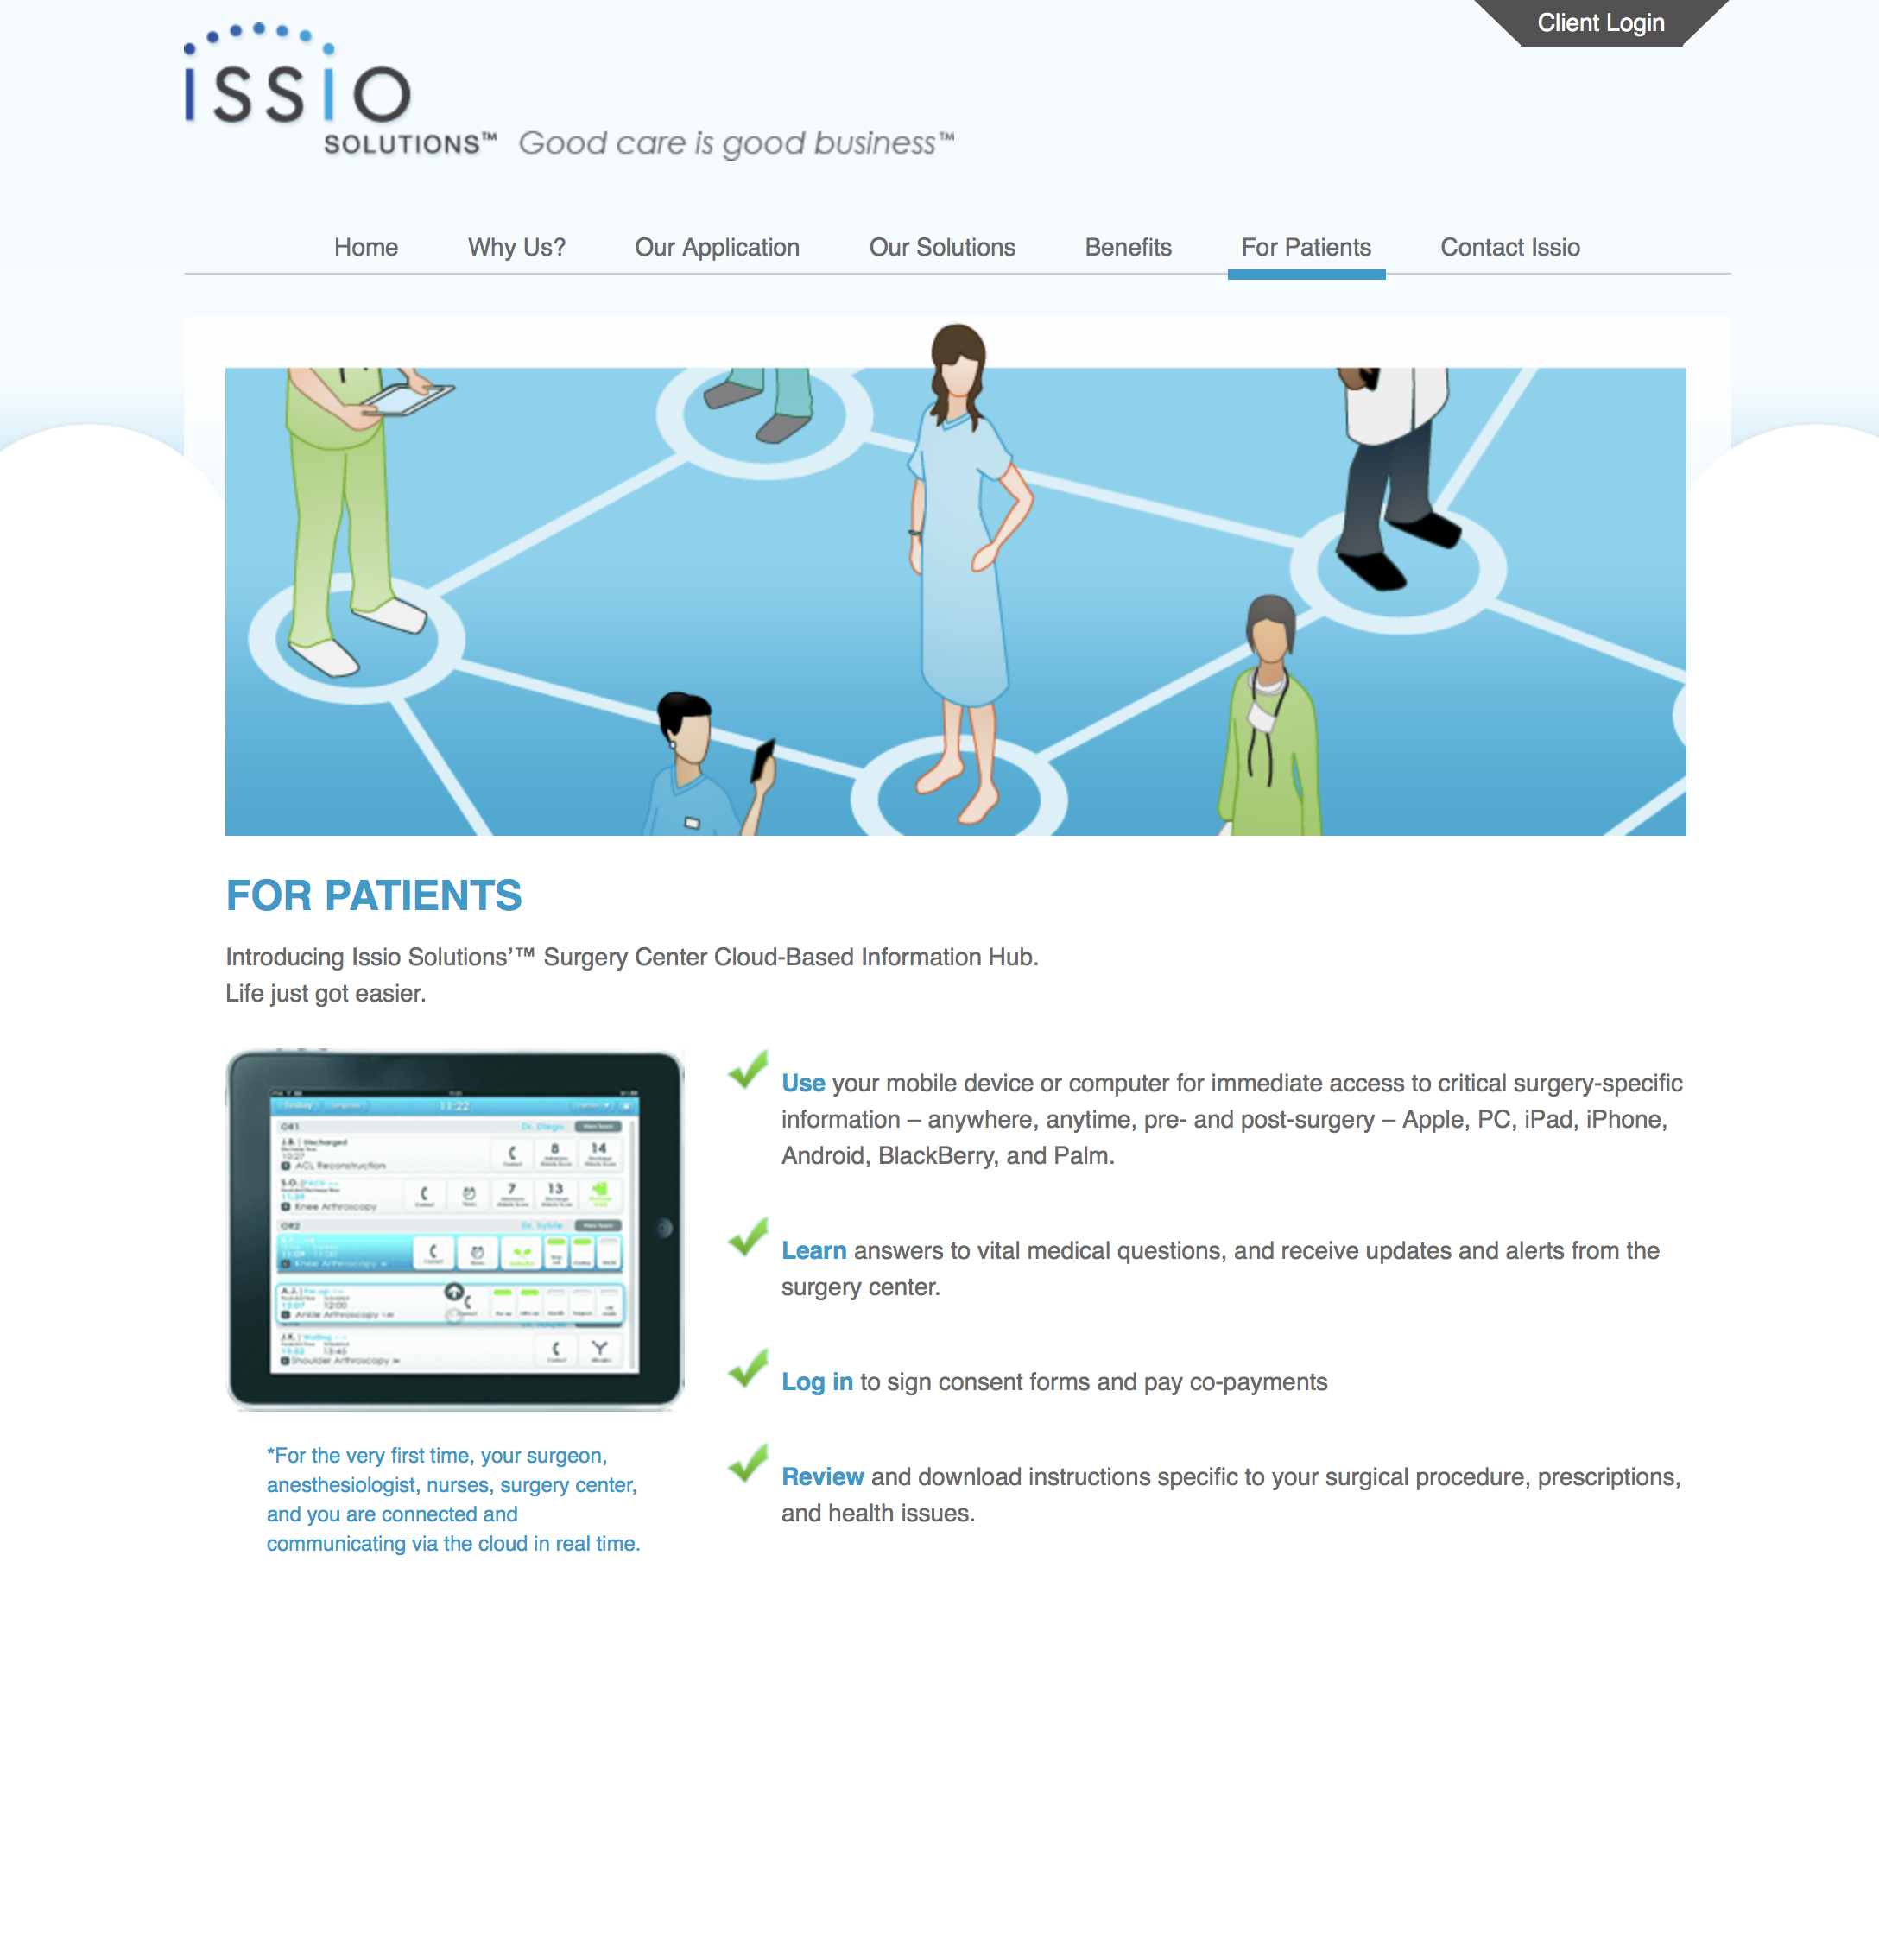 Issio_ForPatients_080716.png